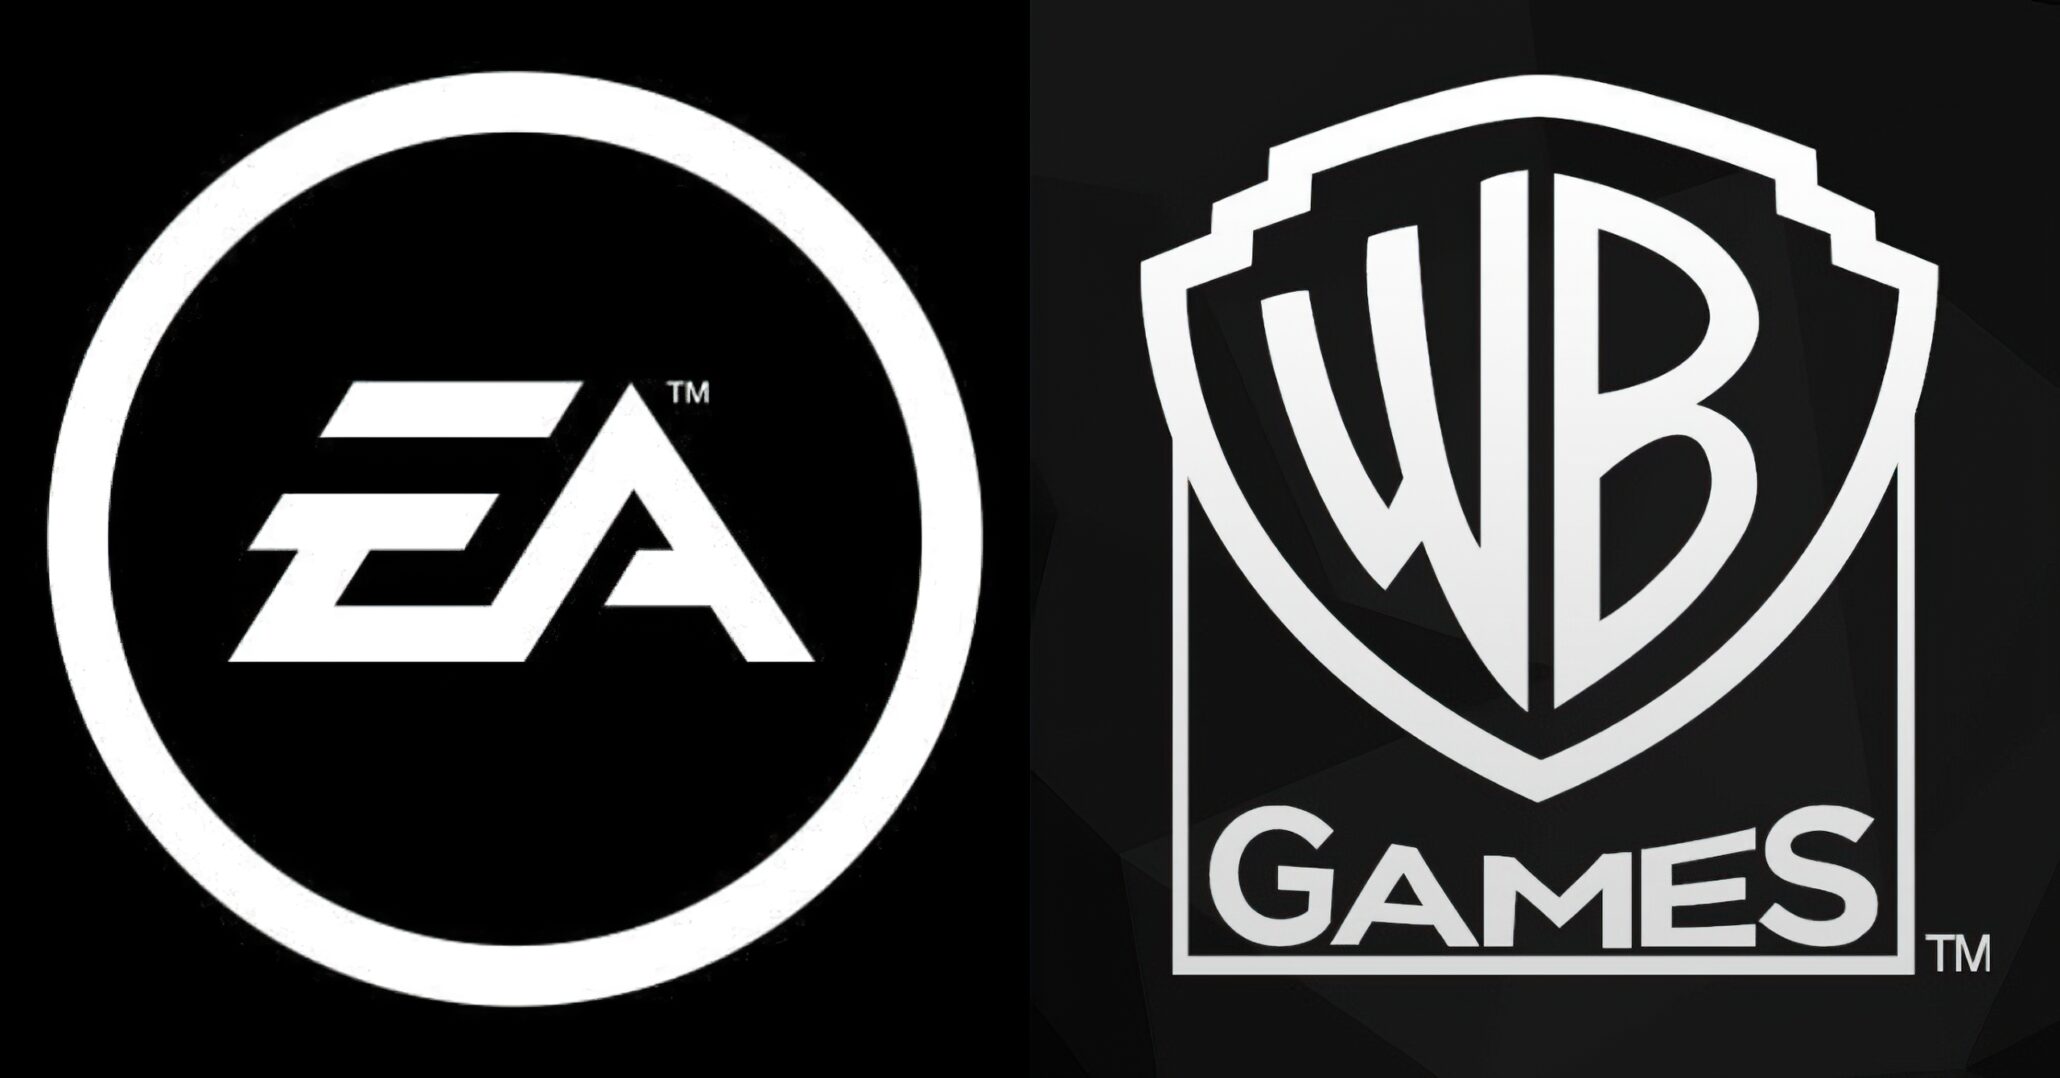 Electronic Arts On A Bidding War With Other Major Game Publishers To Acquire Warner Bros Entertainment